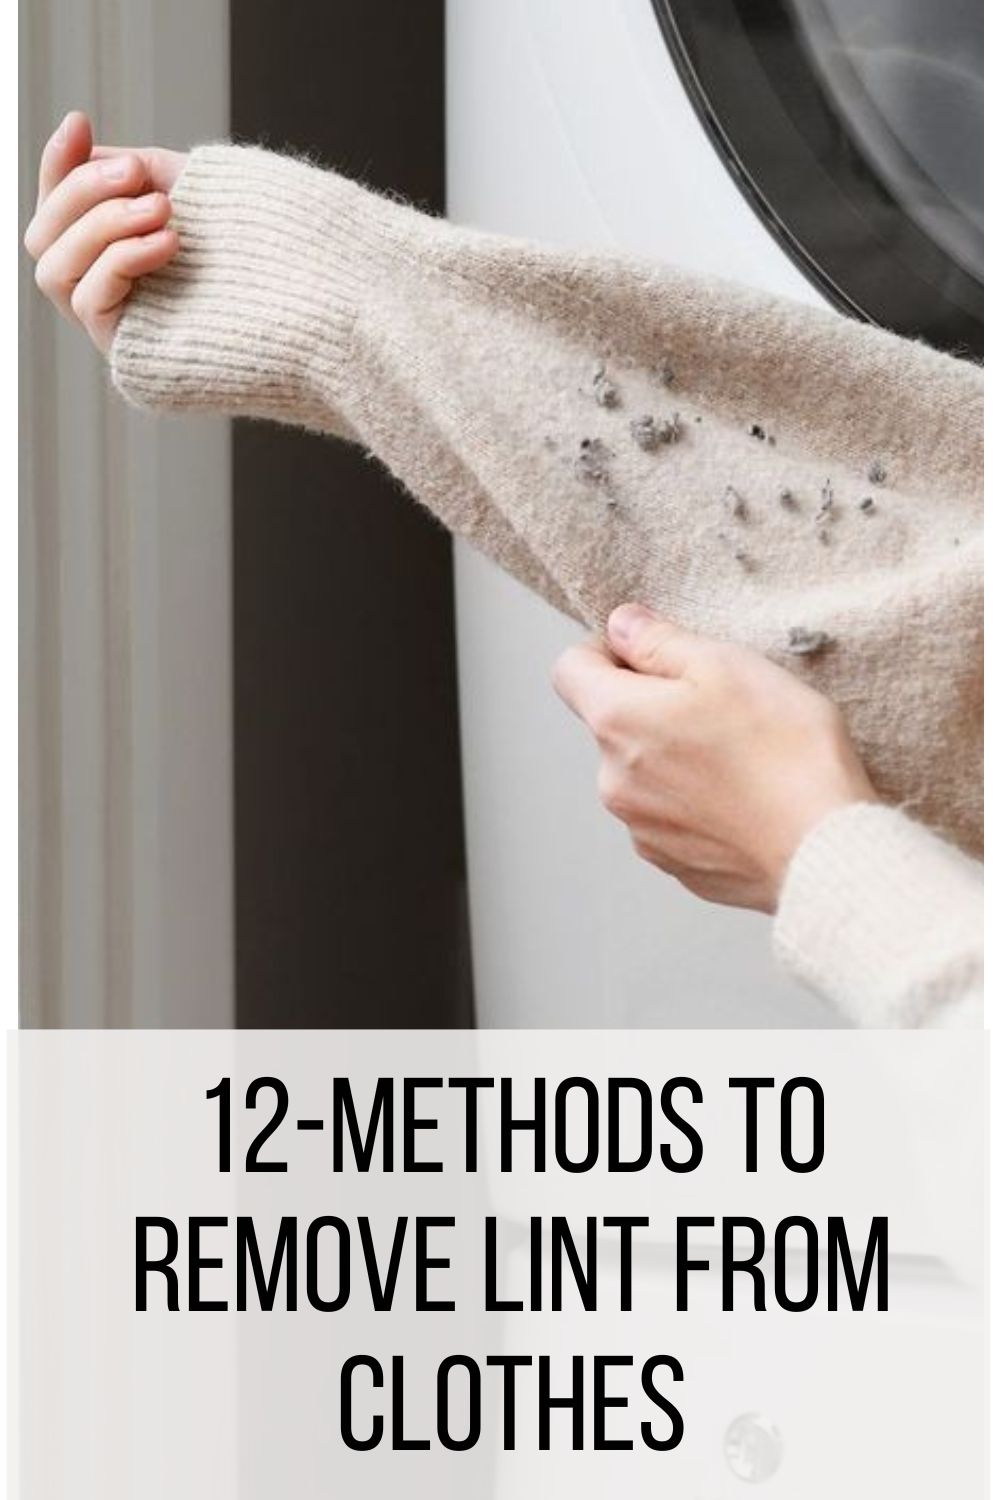 12-Methods to Remove Lint from Clothes